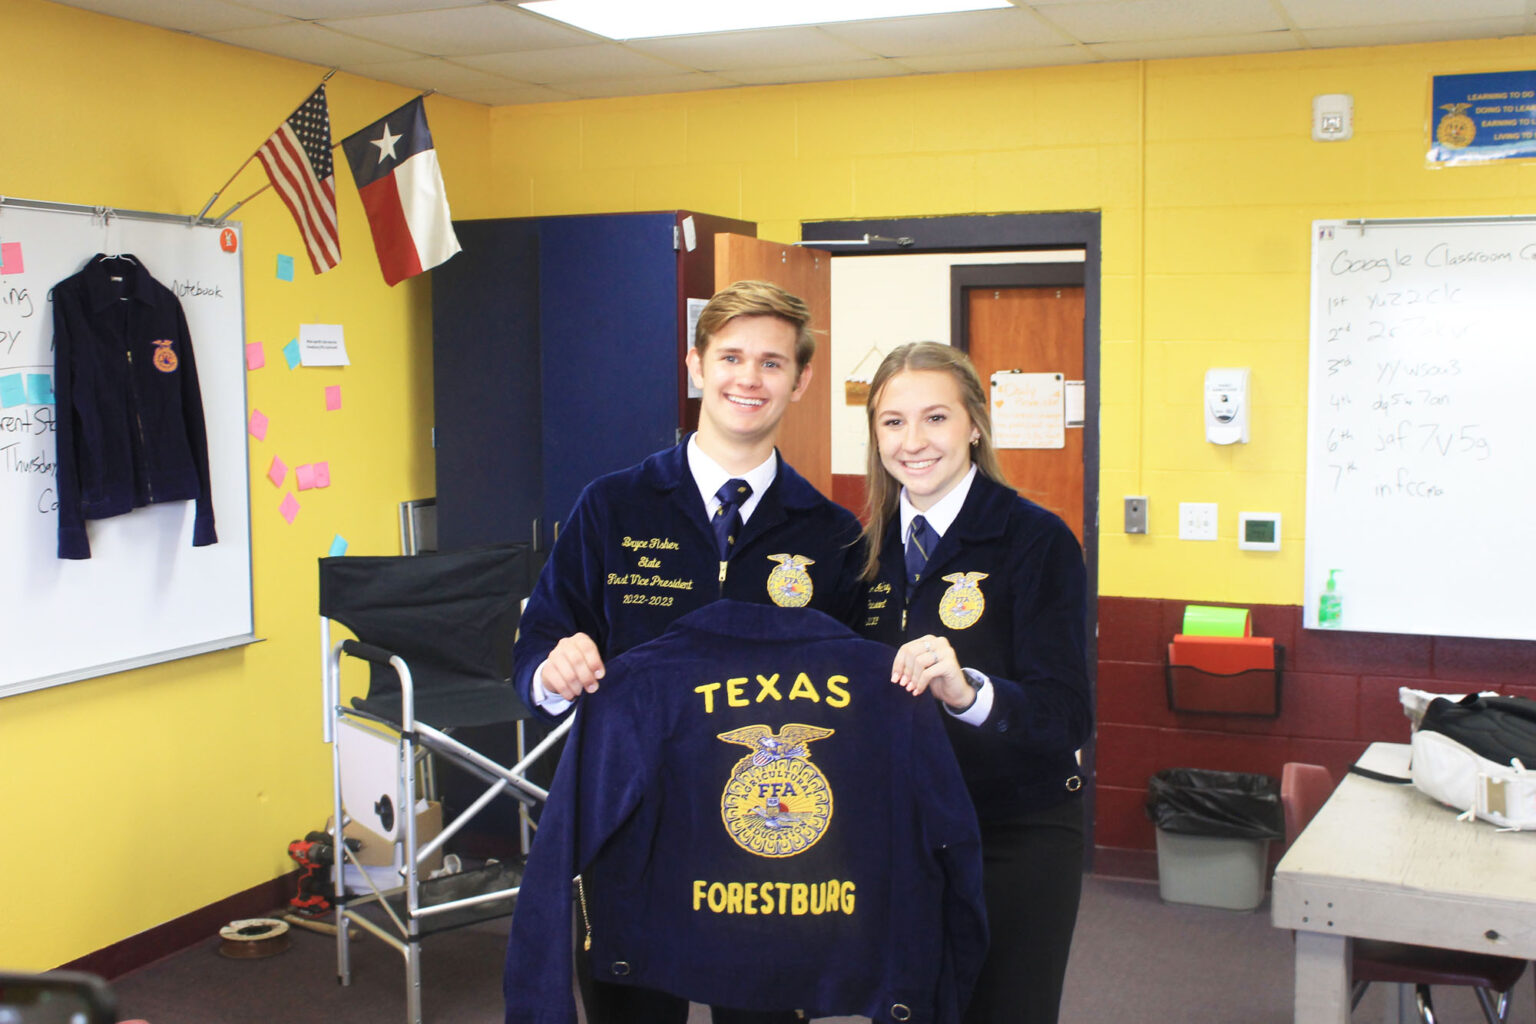 State FFA officers visit Forestburg ISD Bowie News